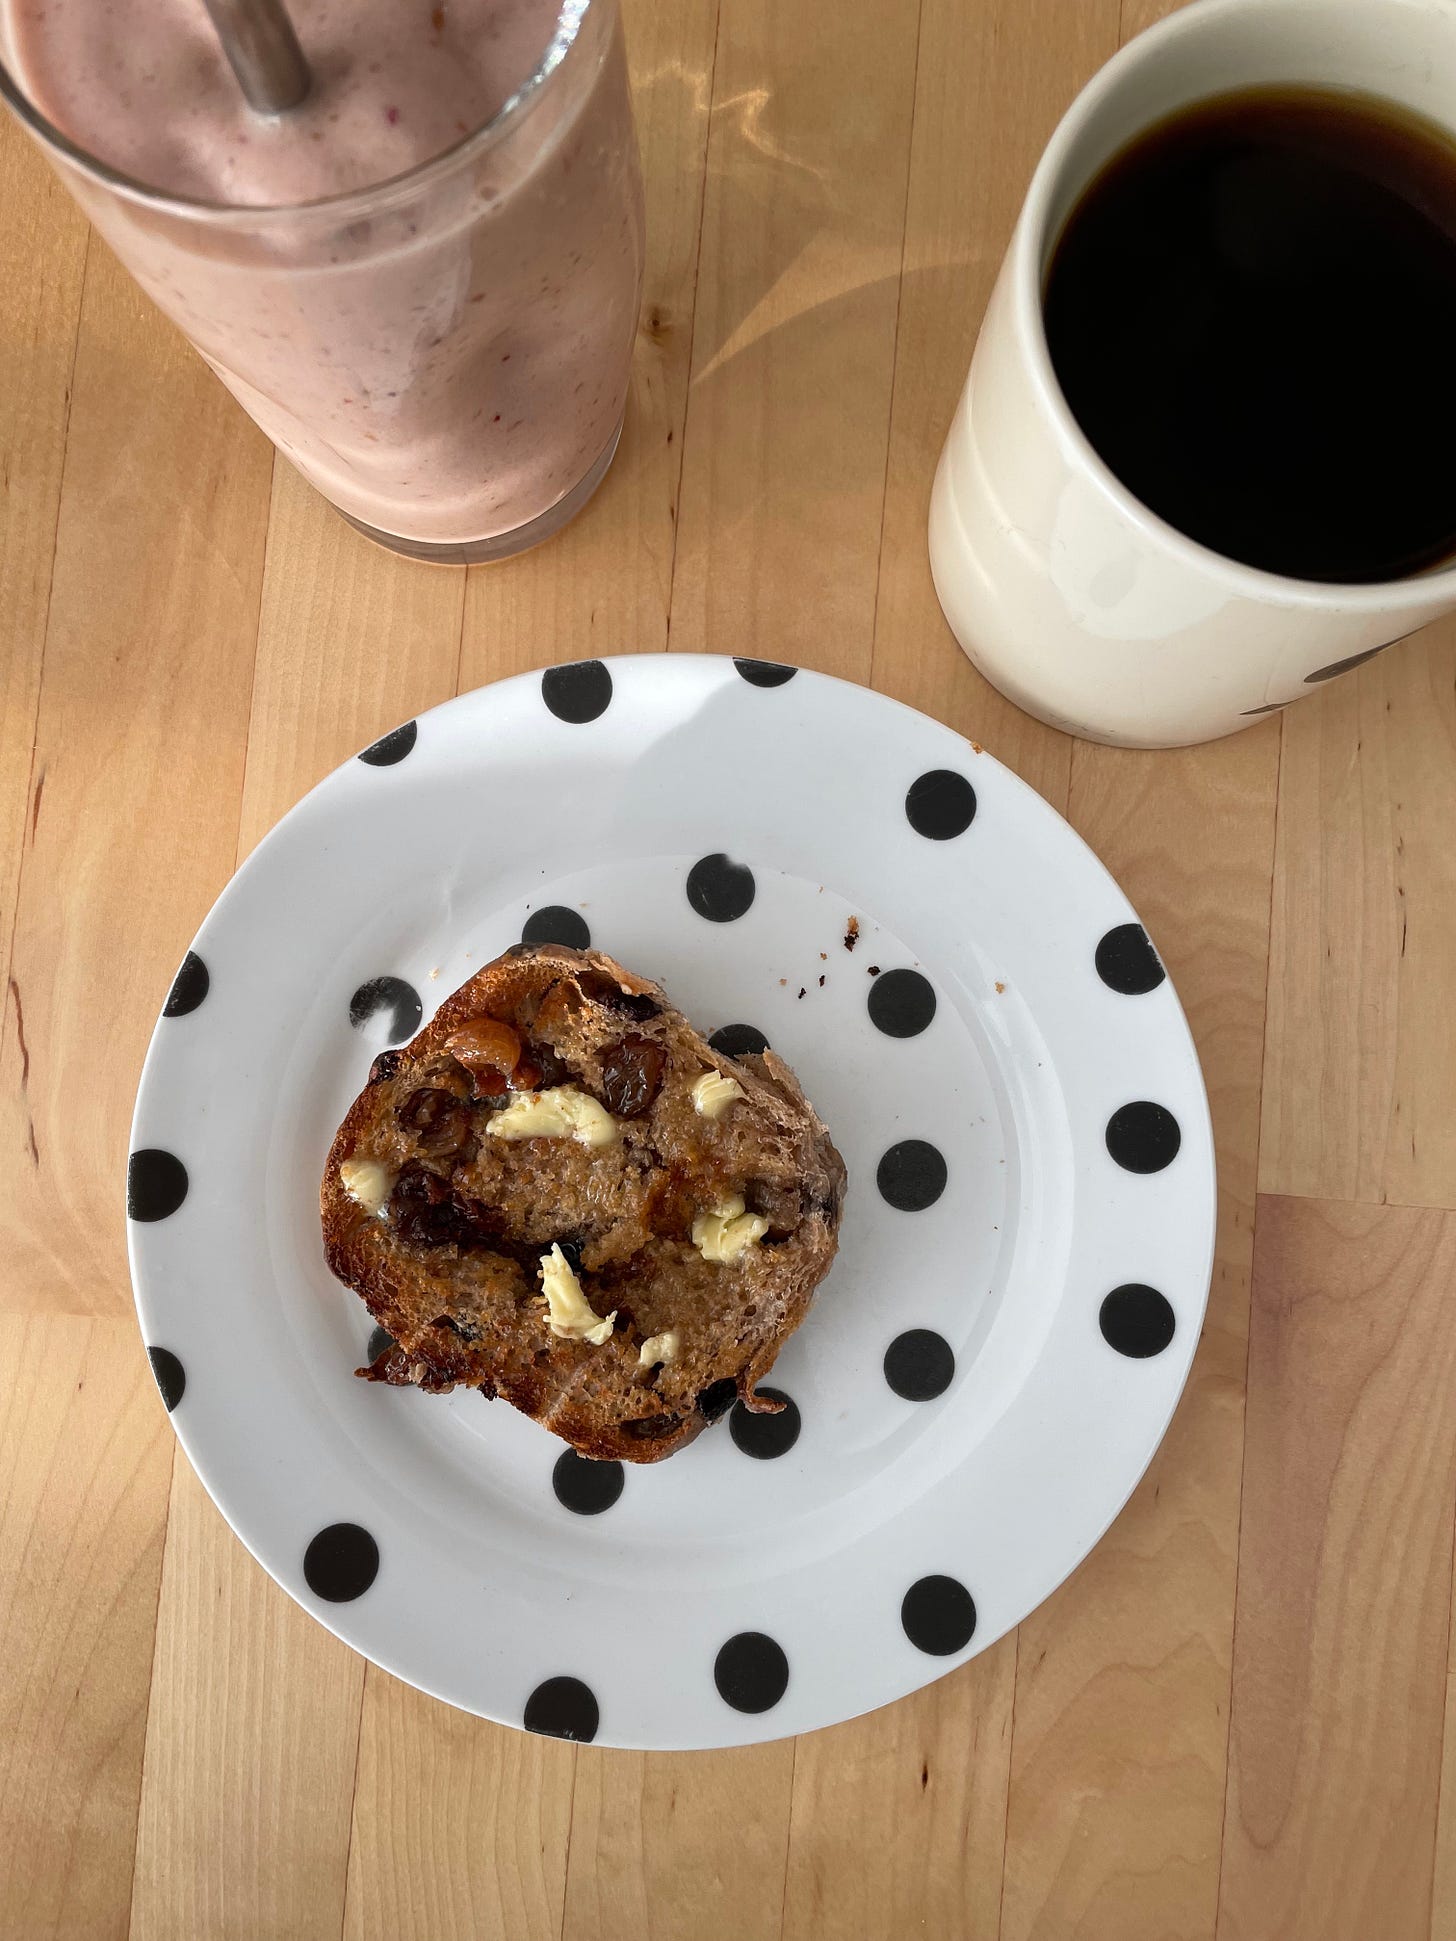 Hot cross bun with coffee and smoothie